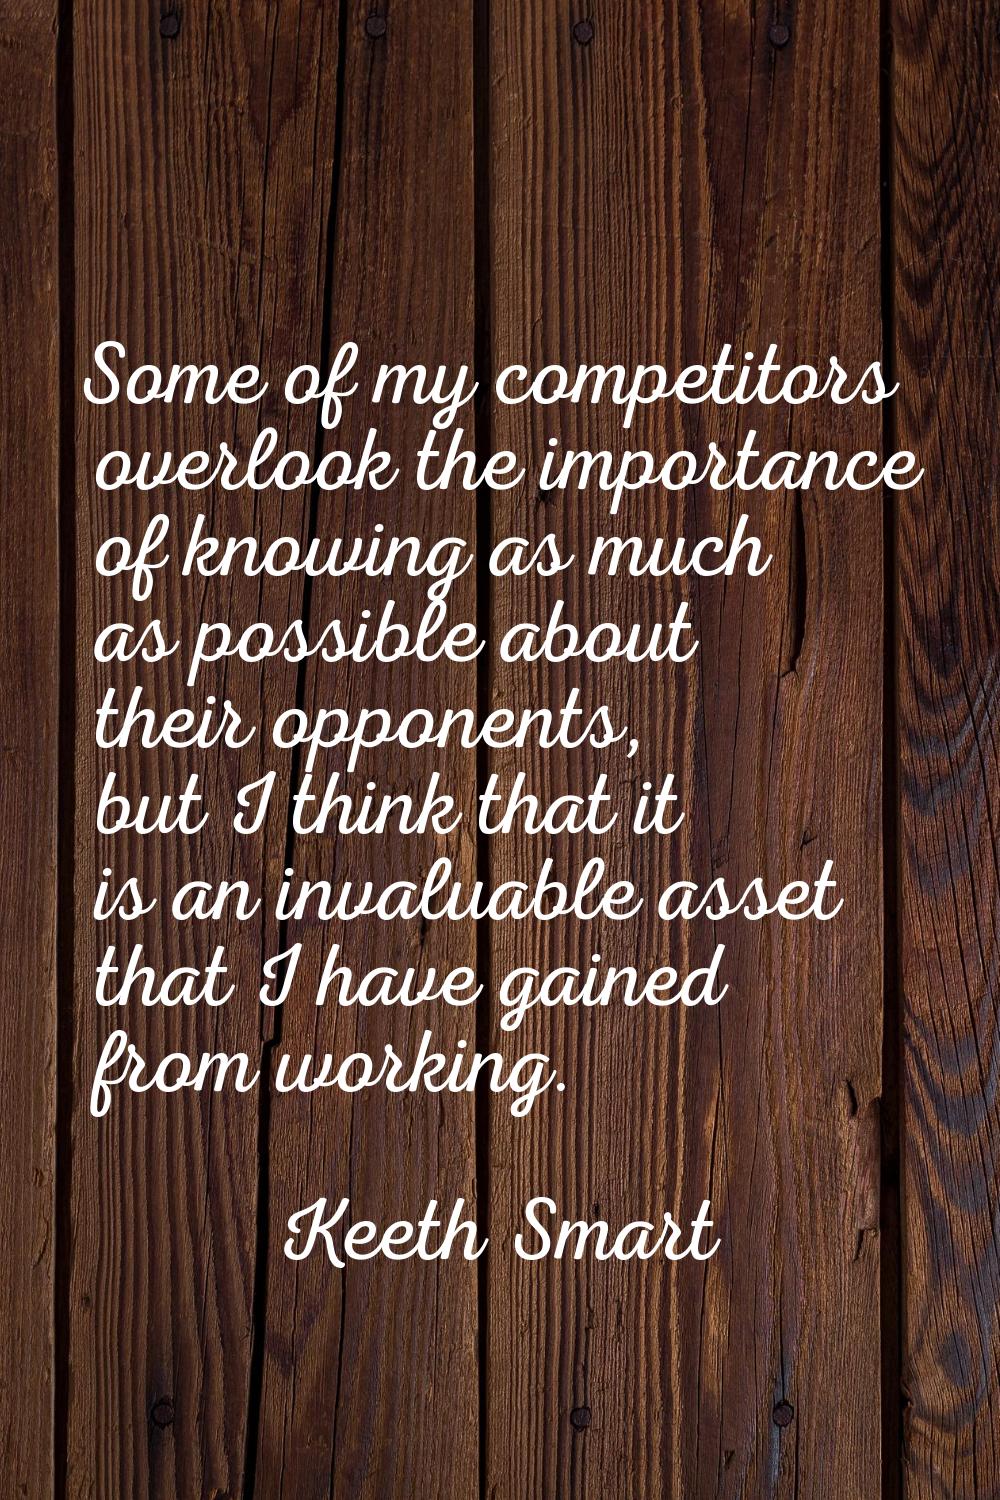 Some of my competitors overlook the importance of knowing as much as possible about their opponents